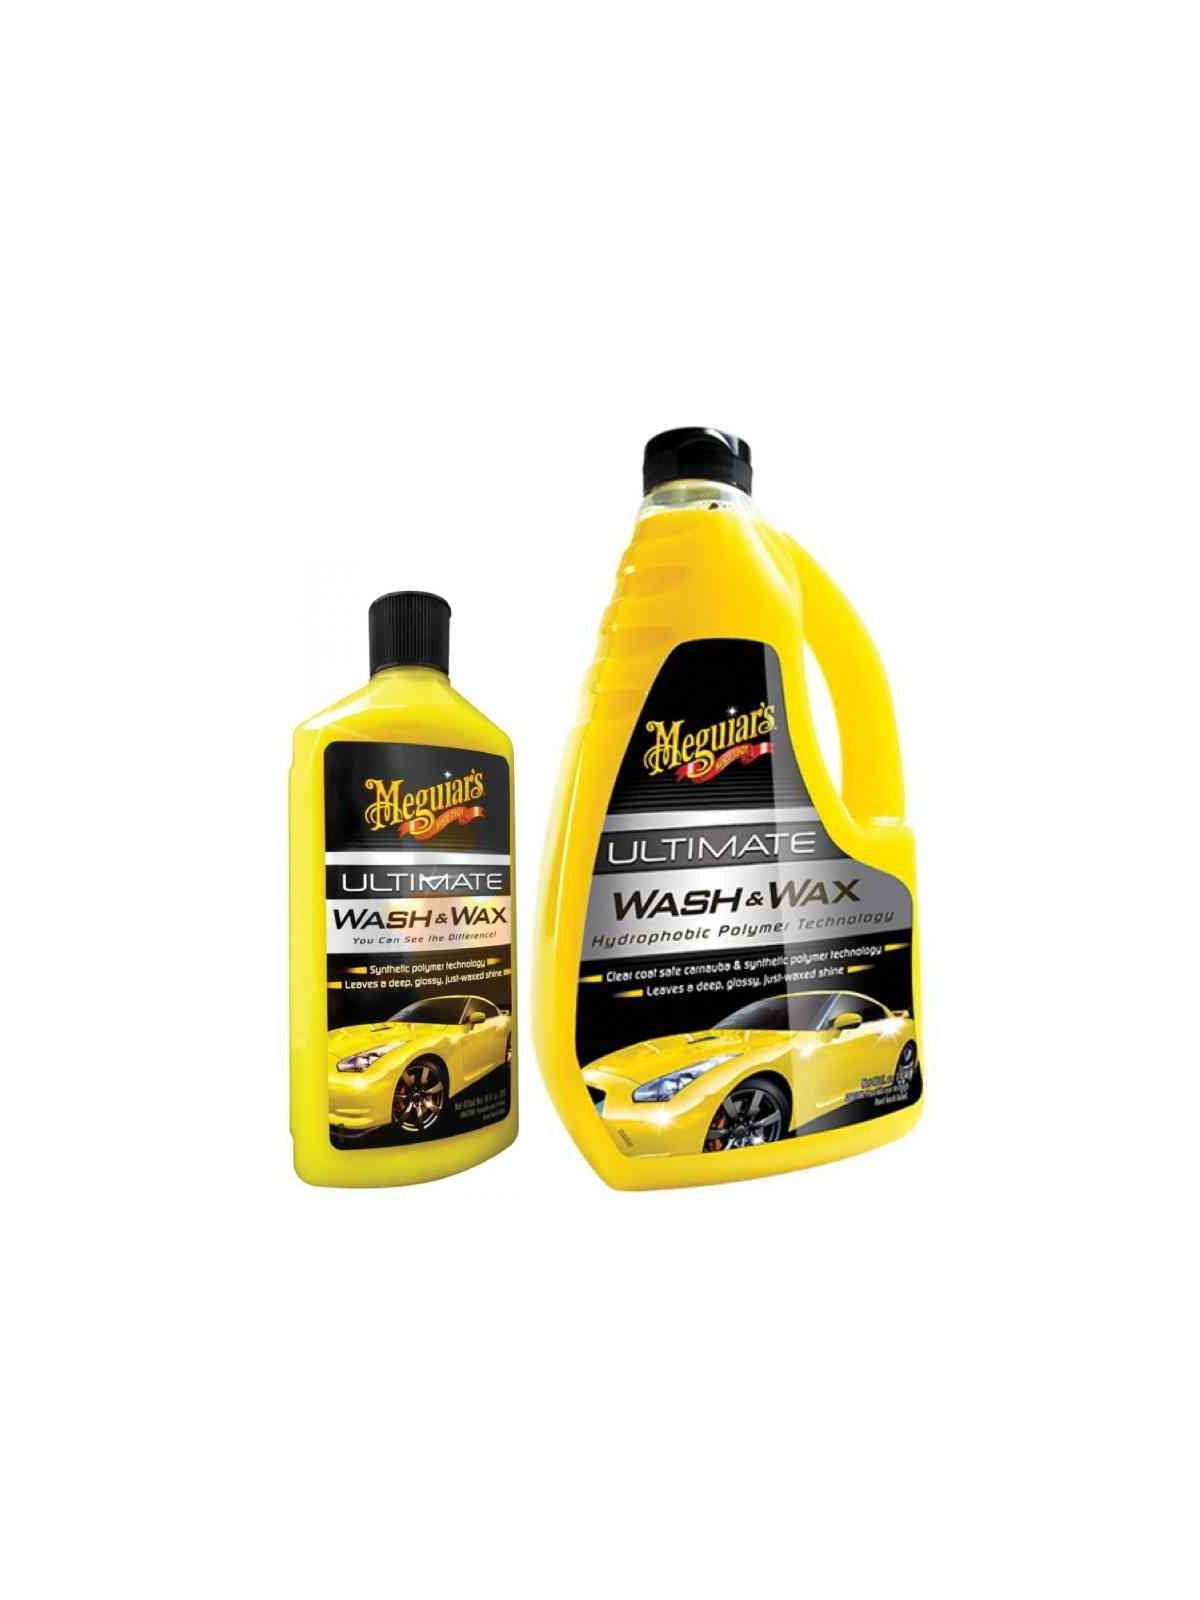 Meguiars Wash and Wax!! *Results will Surprise You* 